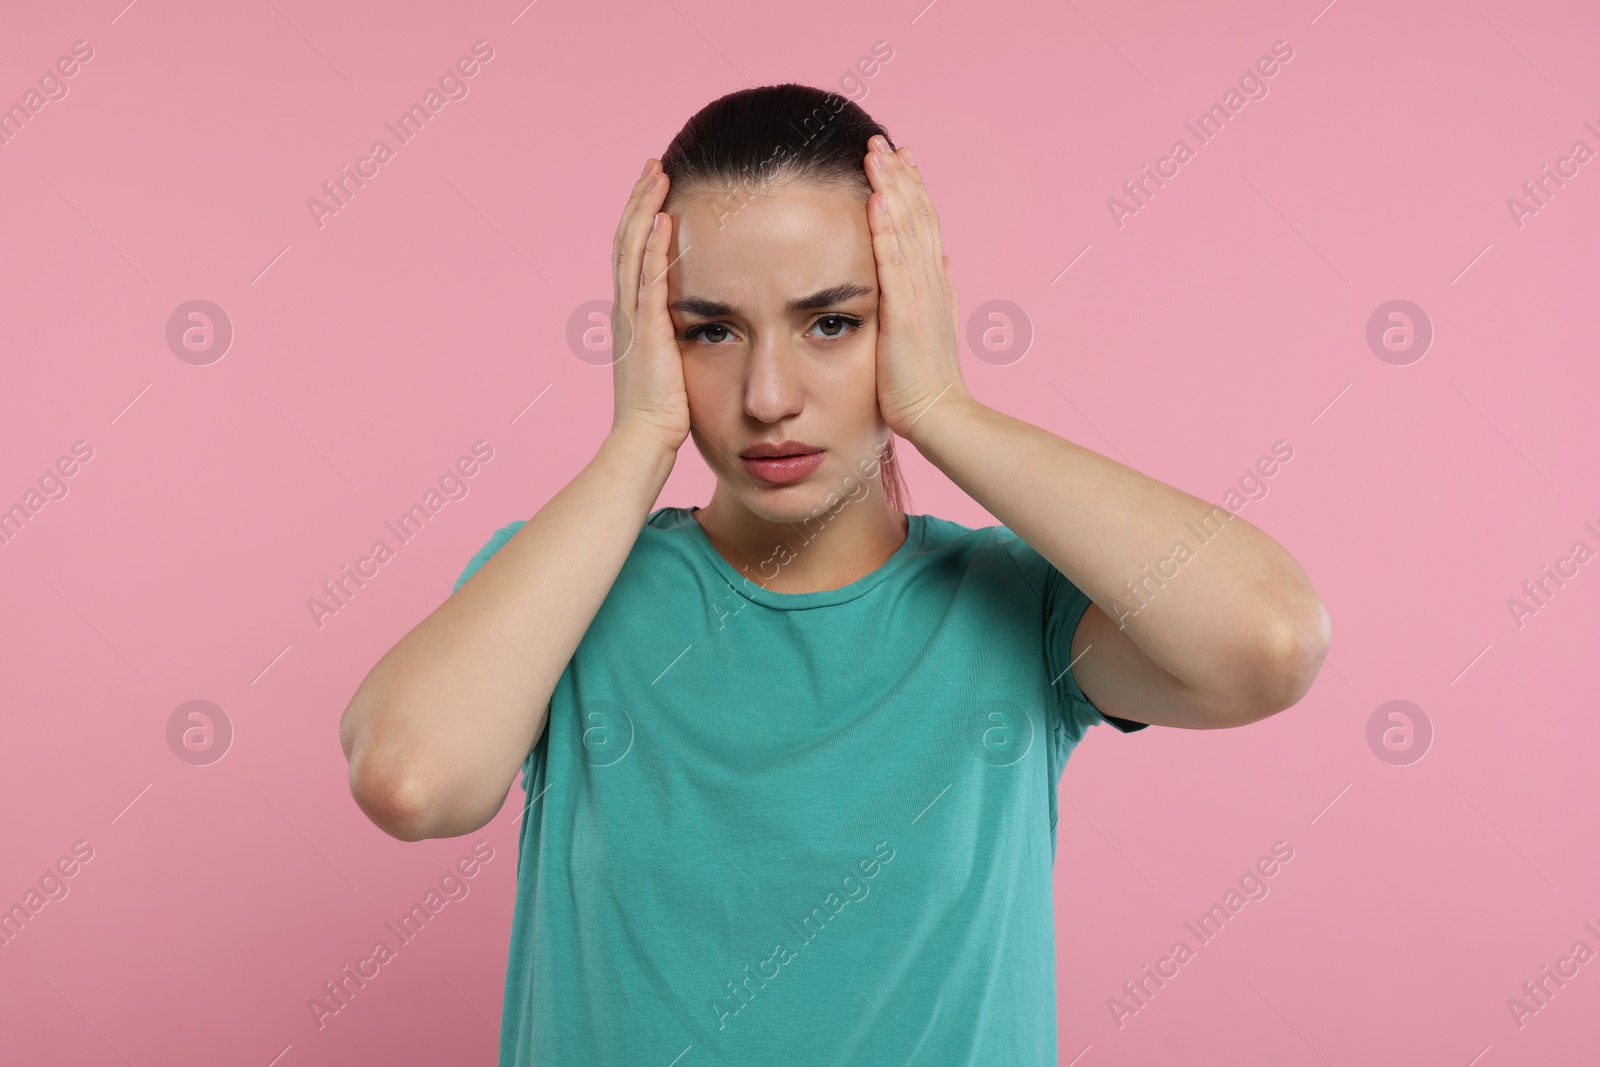 Photo of Resentment. Portrait of upset woman on pink background